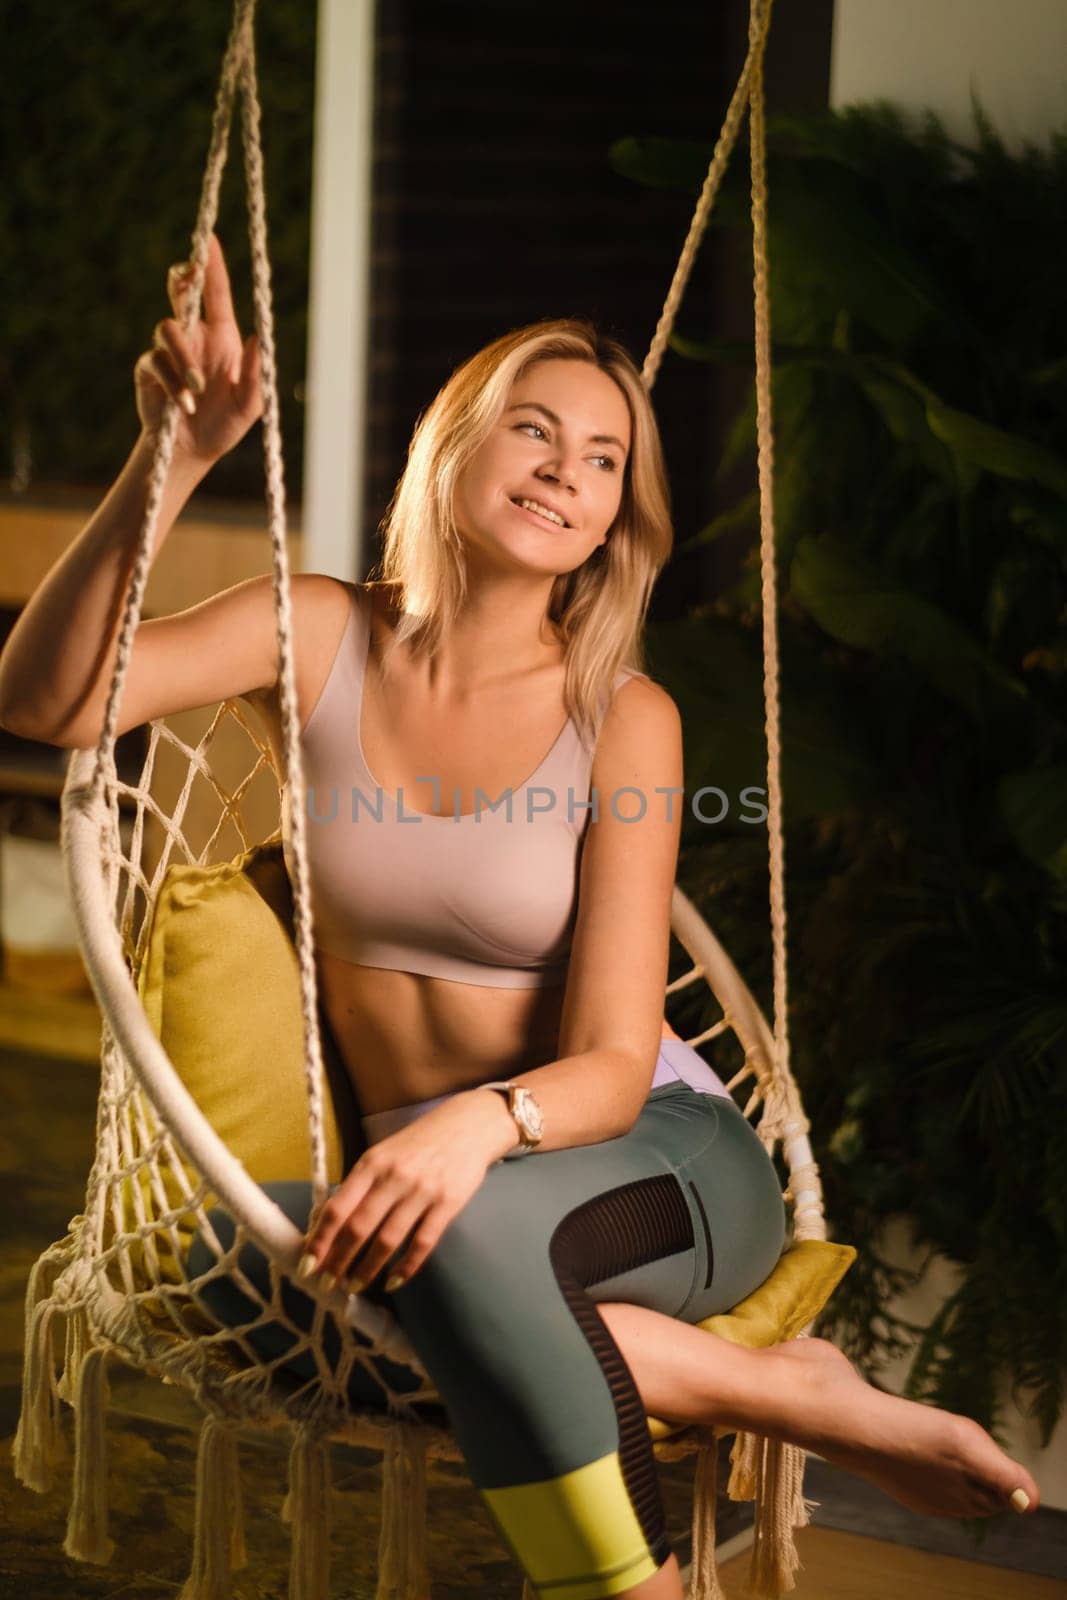 A young woman is resting in a chair after a sports workout and yoga class by Lobachad